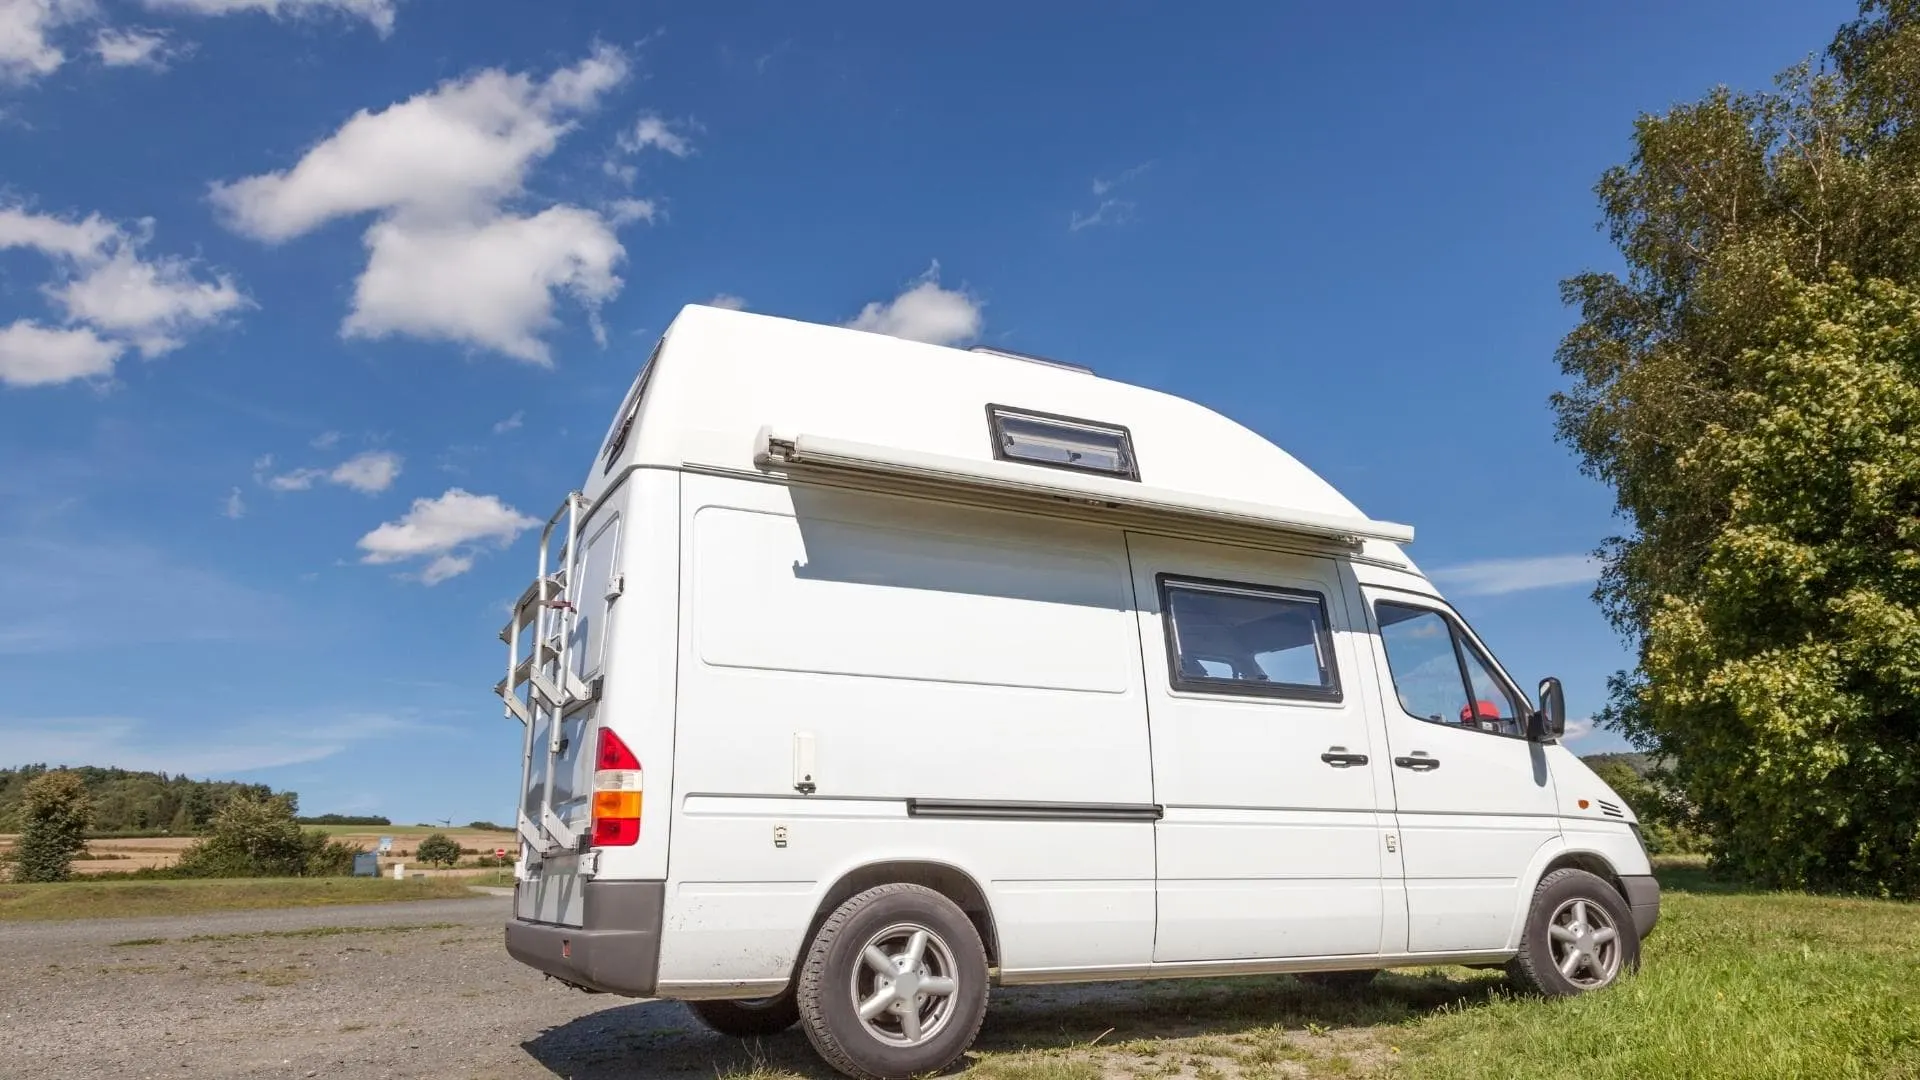 Photo of a small camper van parked in a small space roadside, one of the benefits of smaller RVs